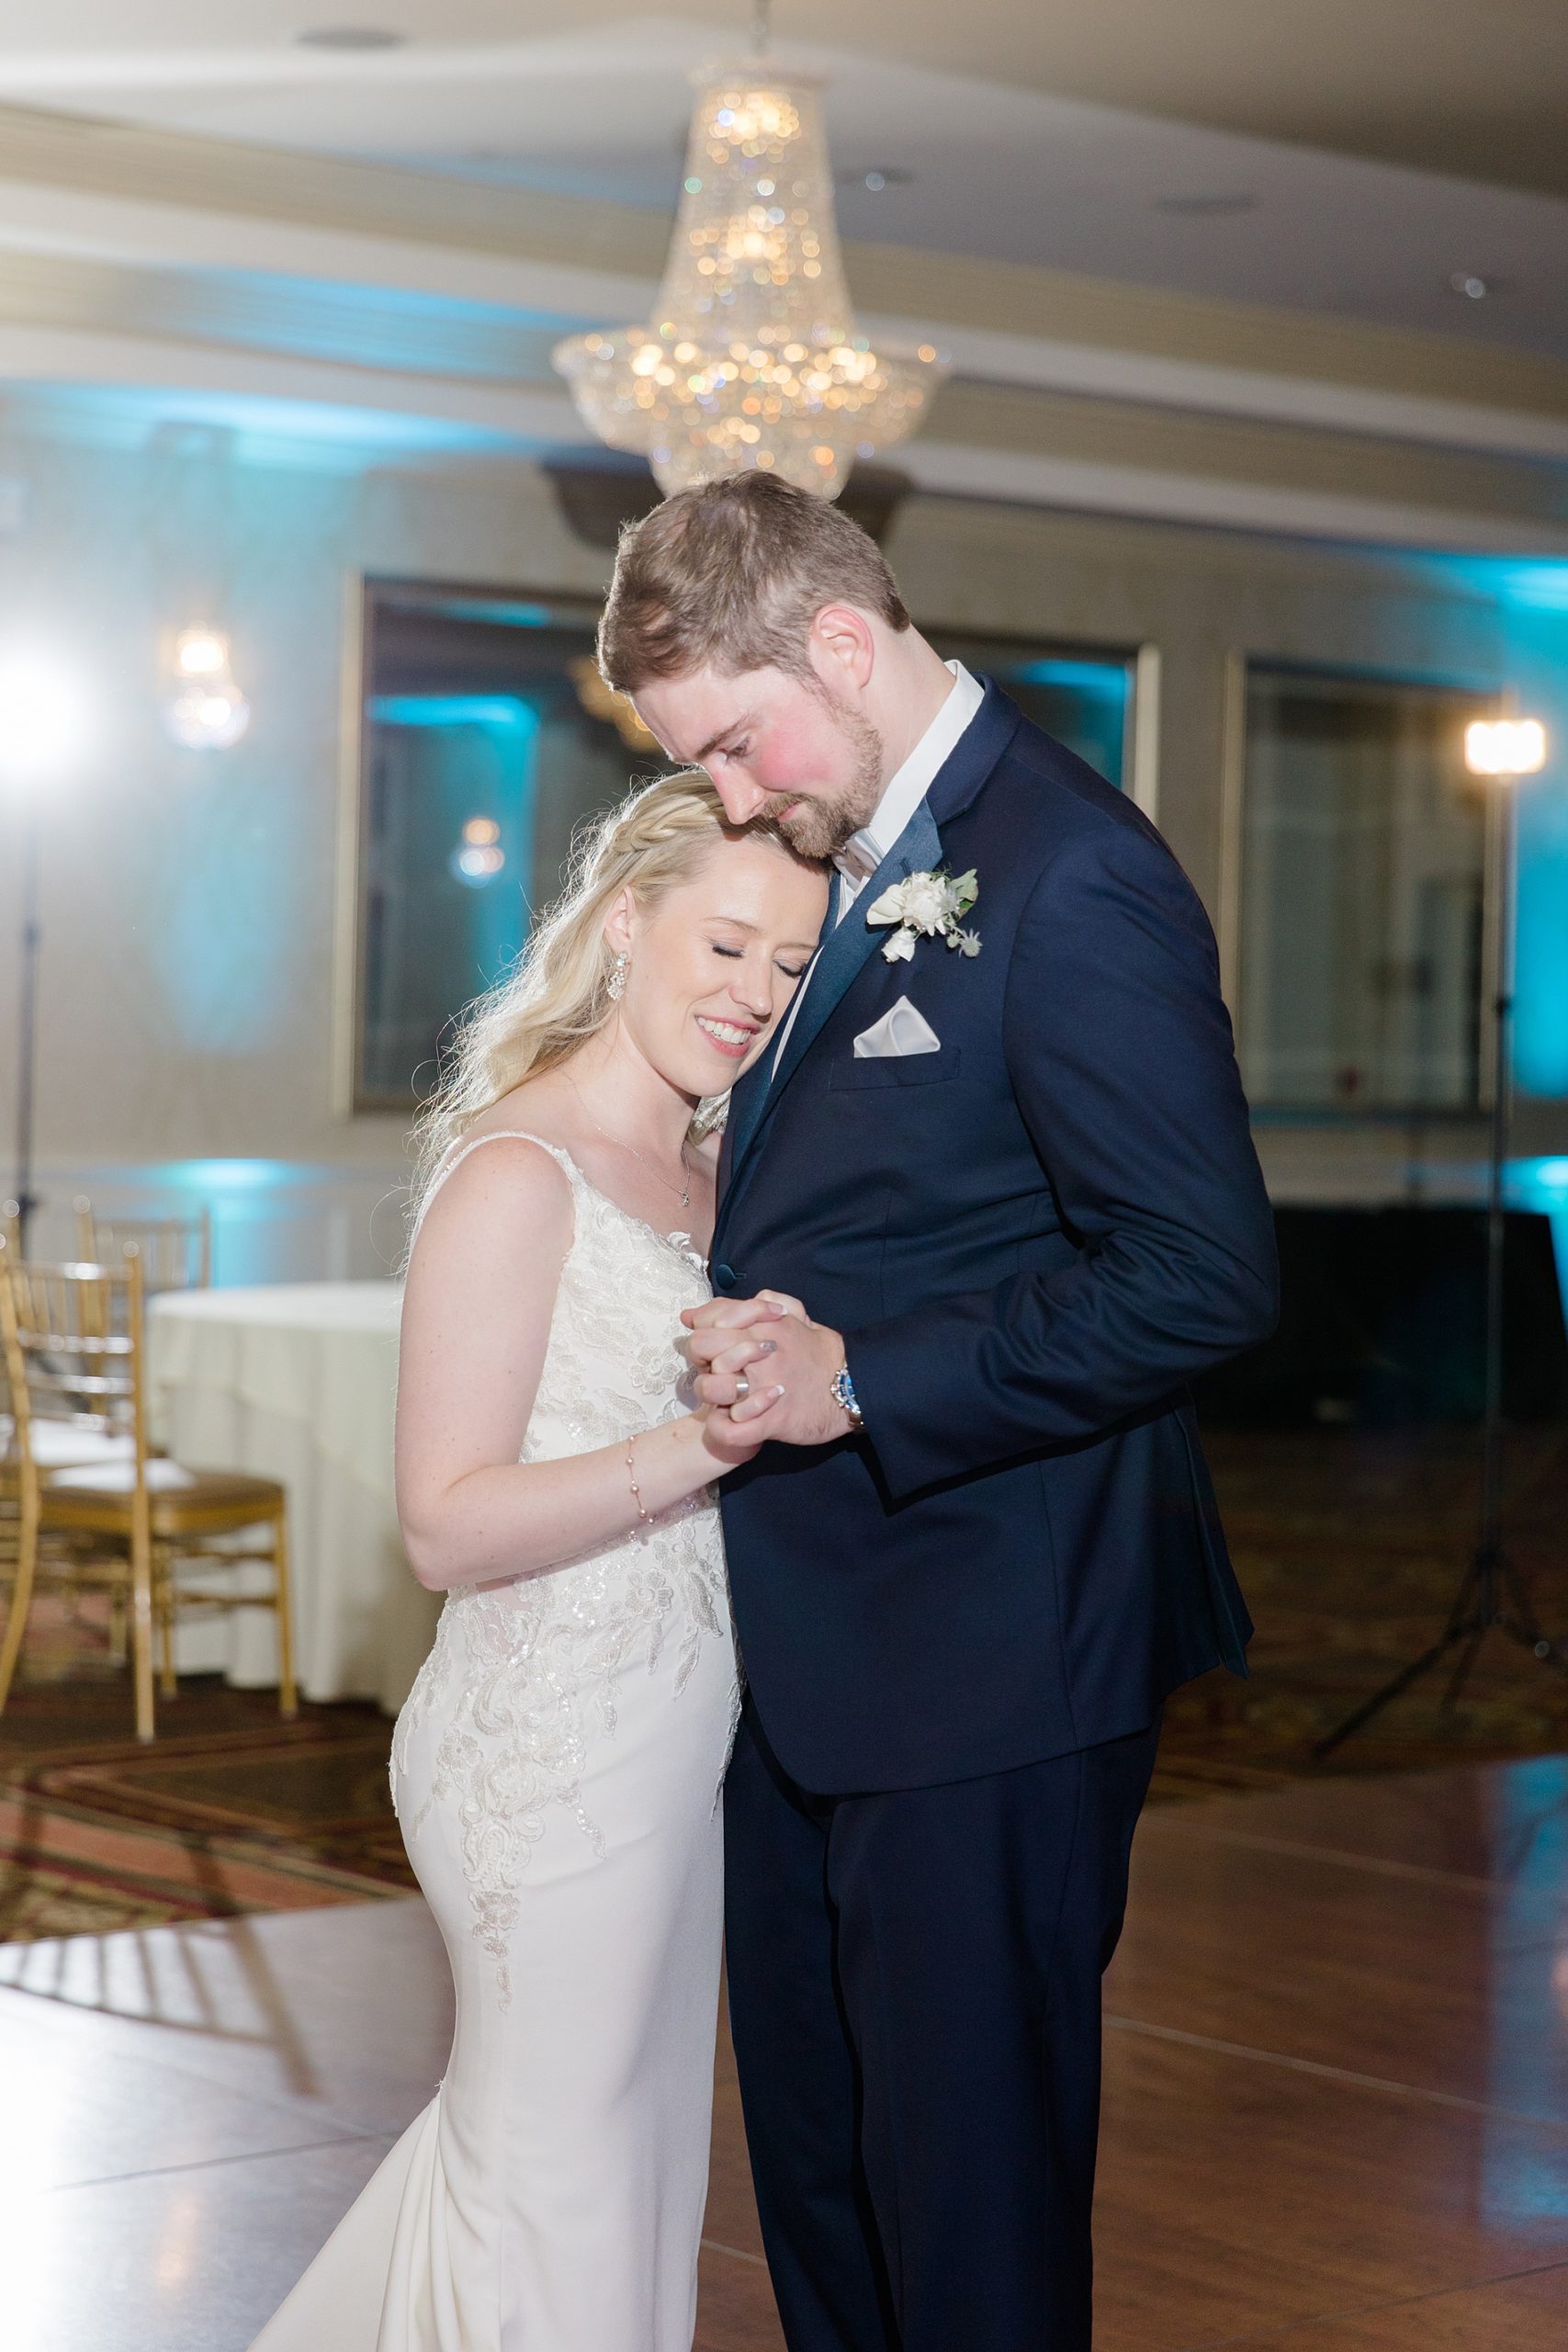 bride and groom share private dance together to end the night